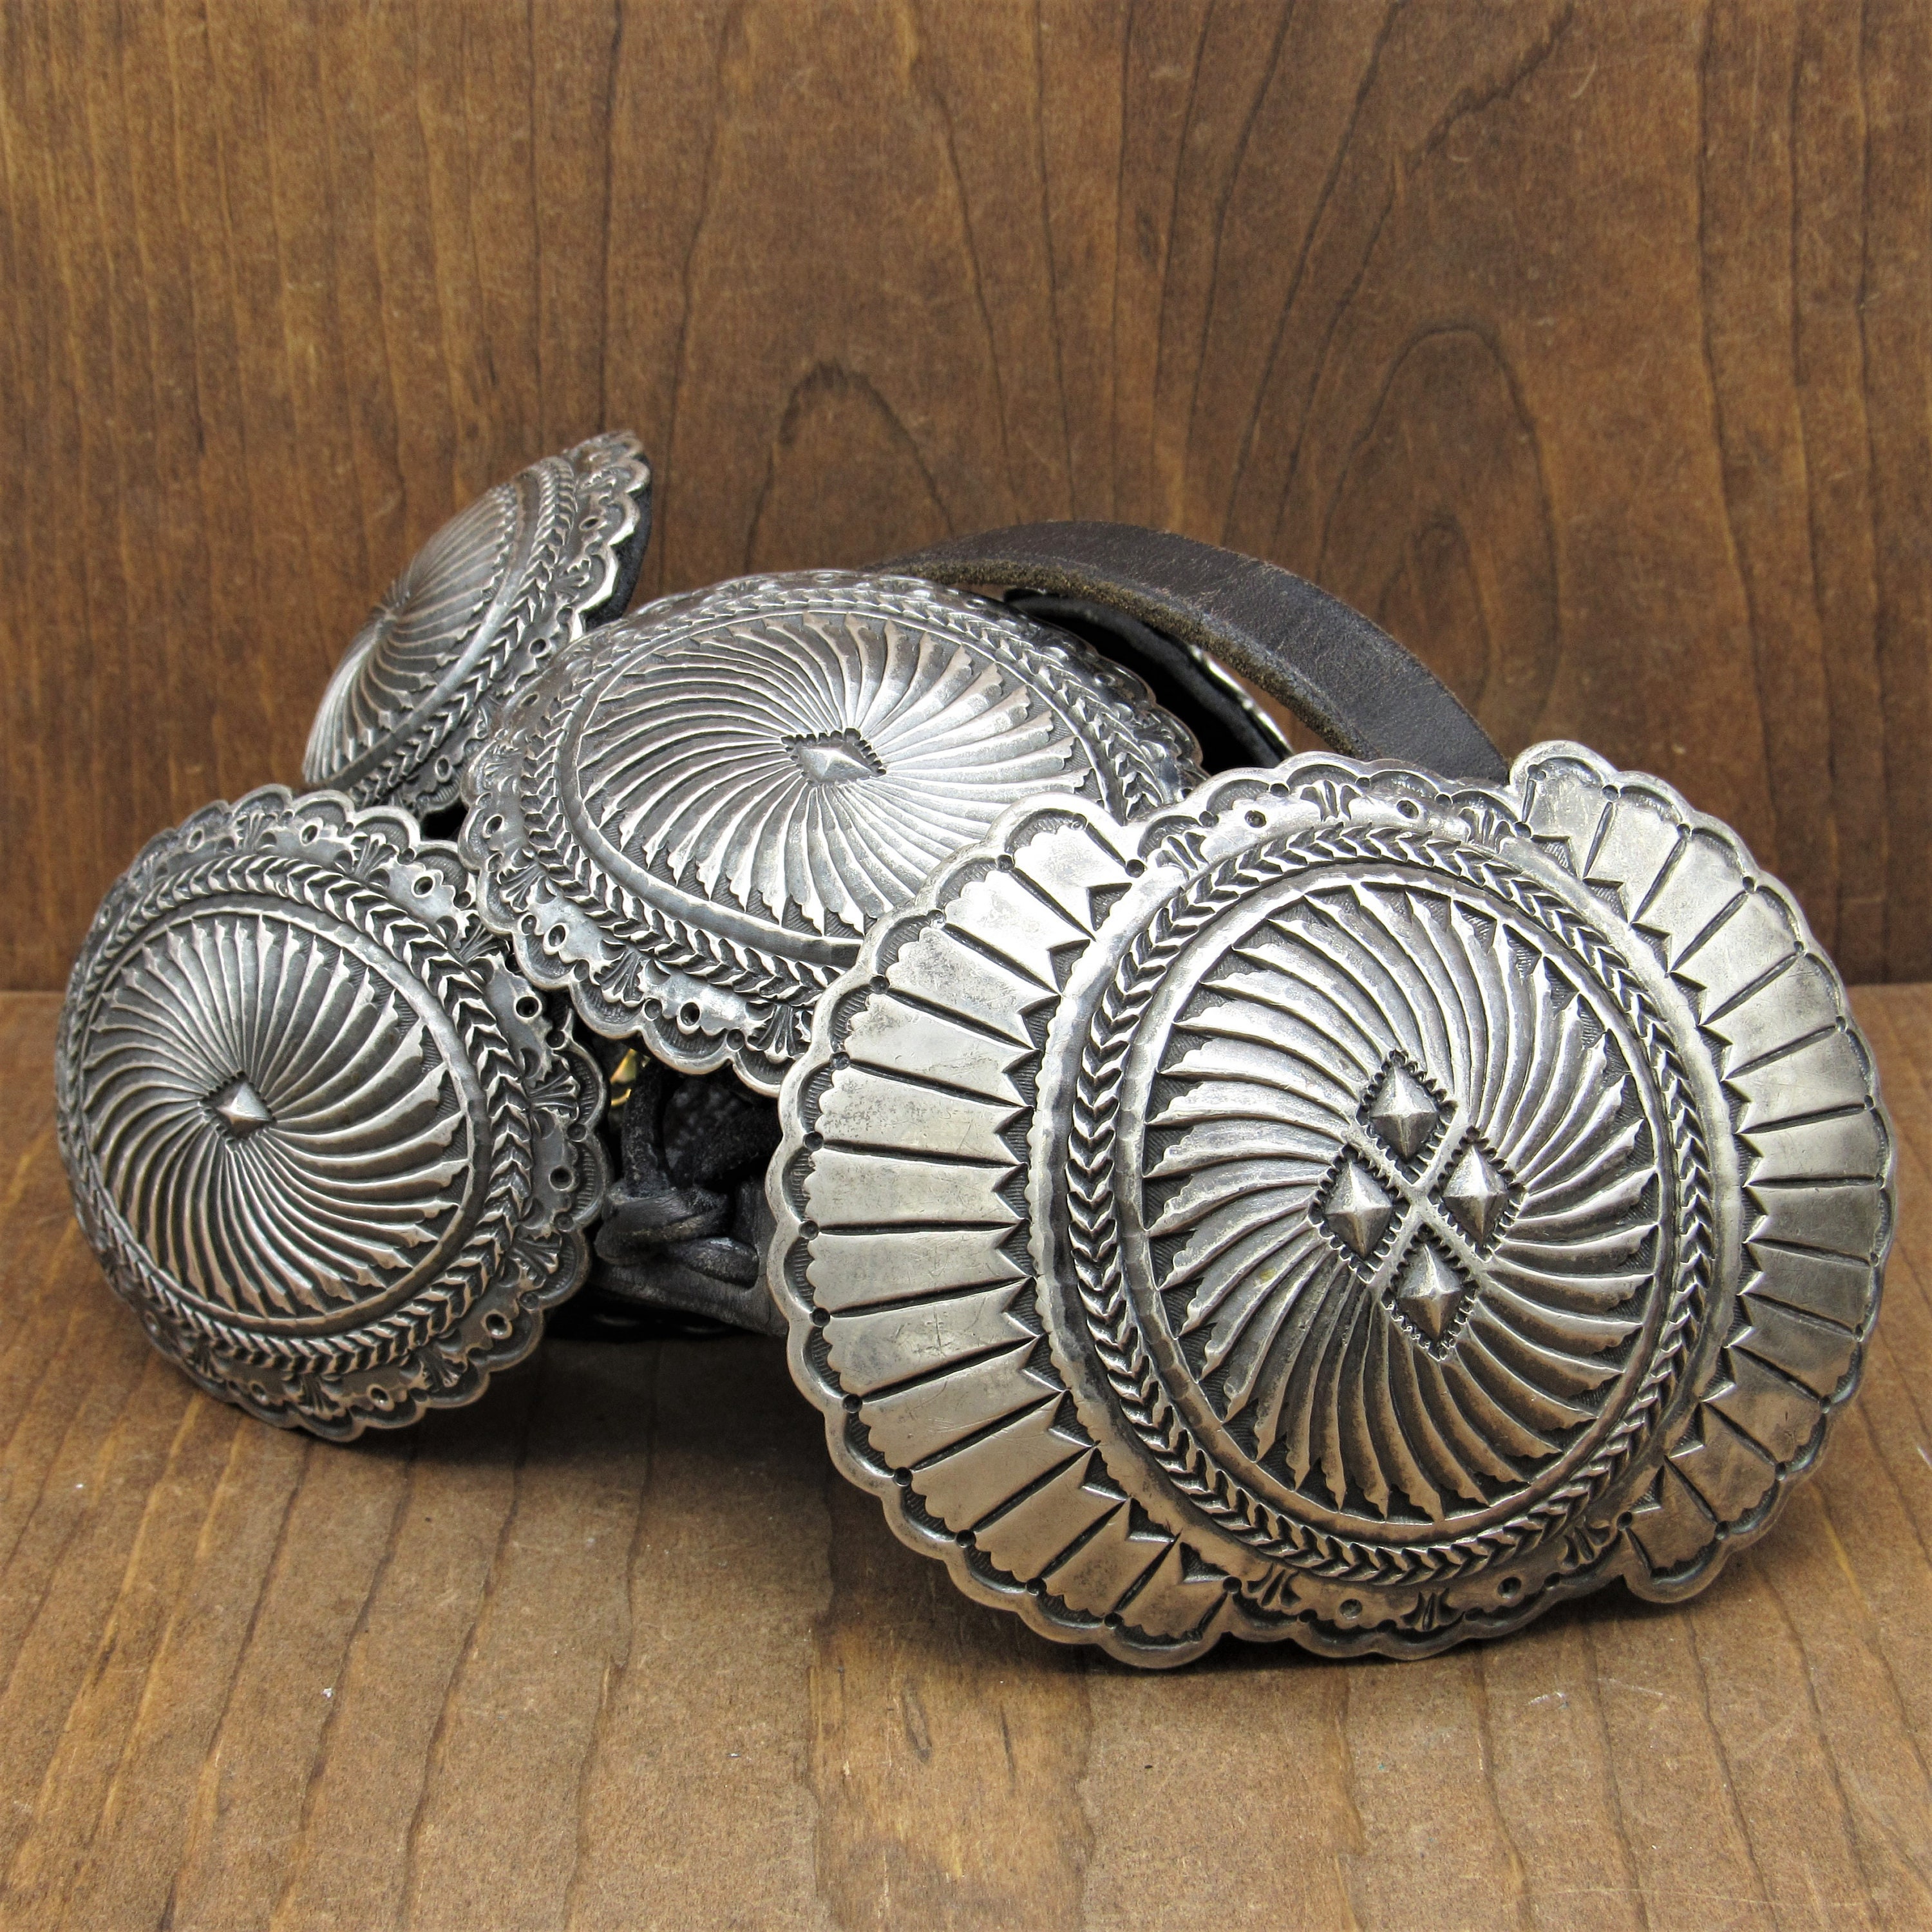 Coral Stone 2 " Delicate 1960s Old Pawn Navajo Sterling Silver Delicate Accessoires Riemen & bretels Riemgespen Incised Pretty Concho Flower Belt Buckle Hand Chiseled Design 